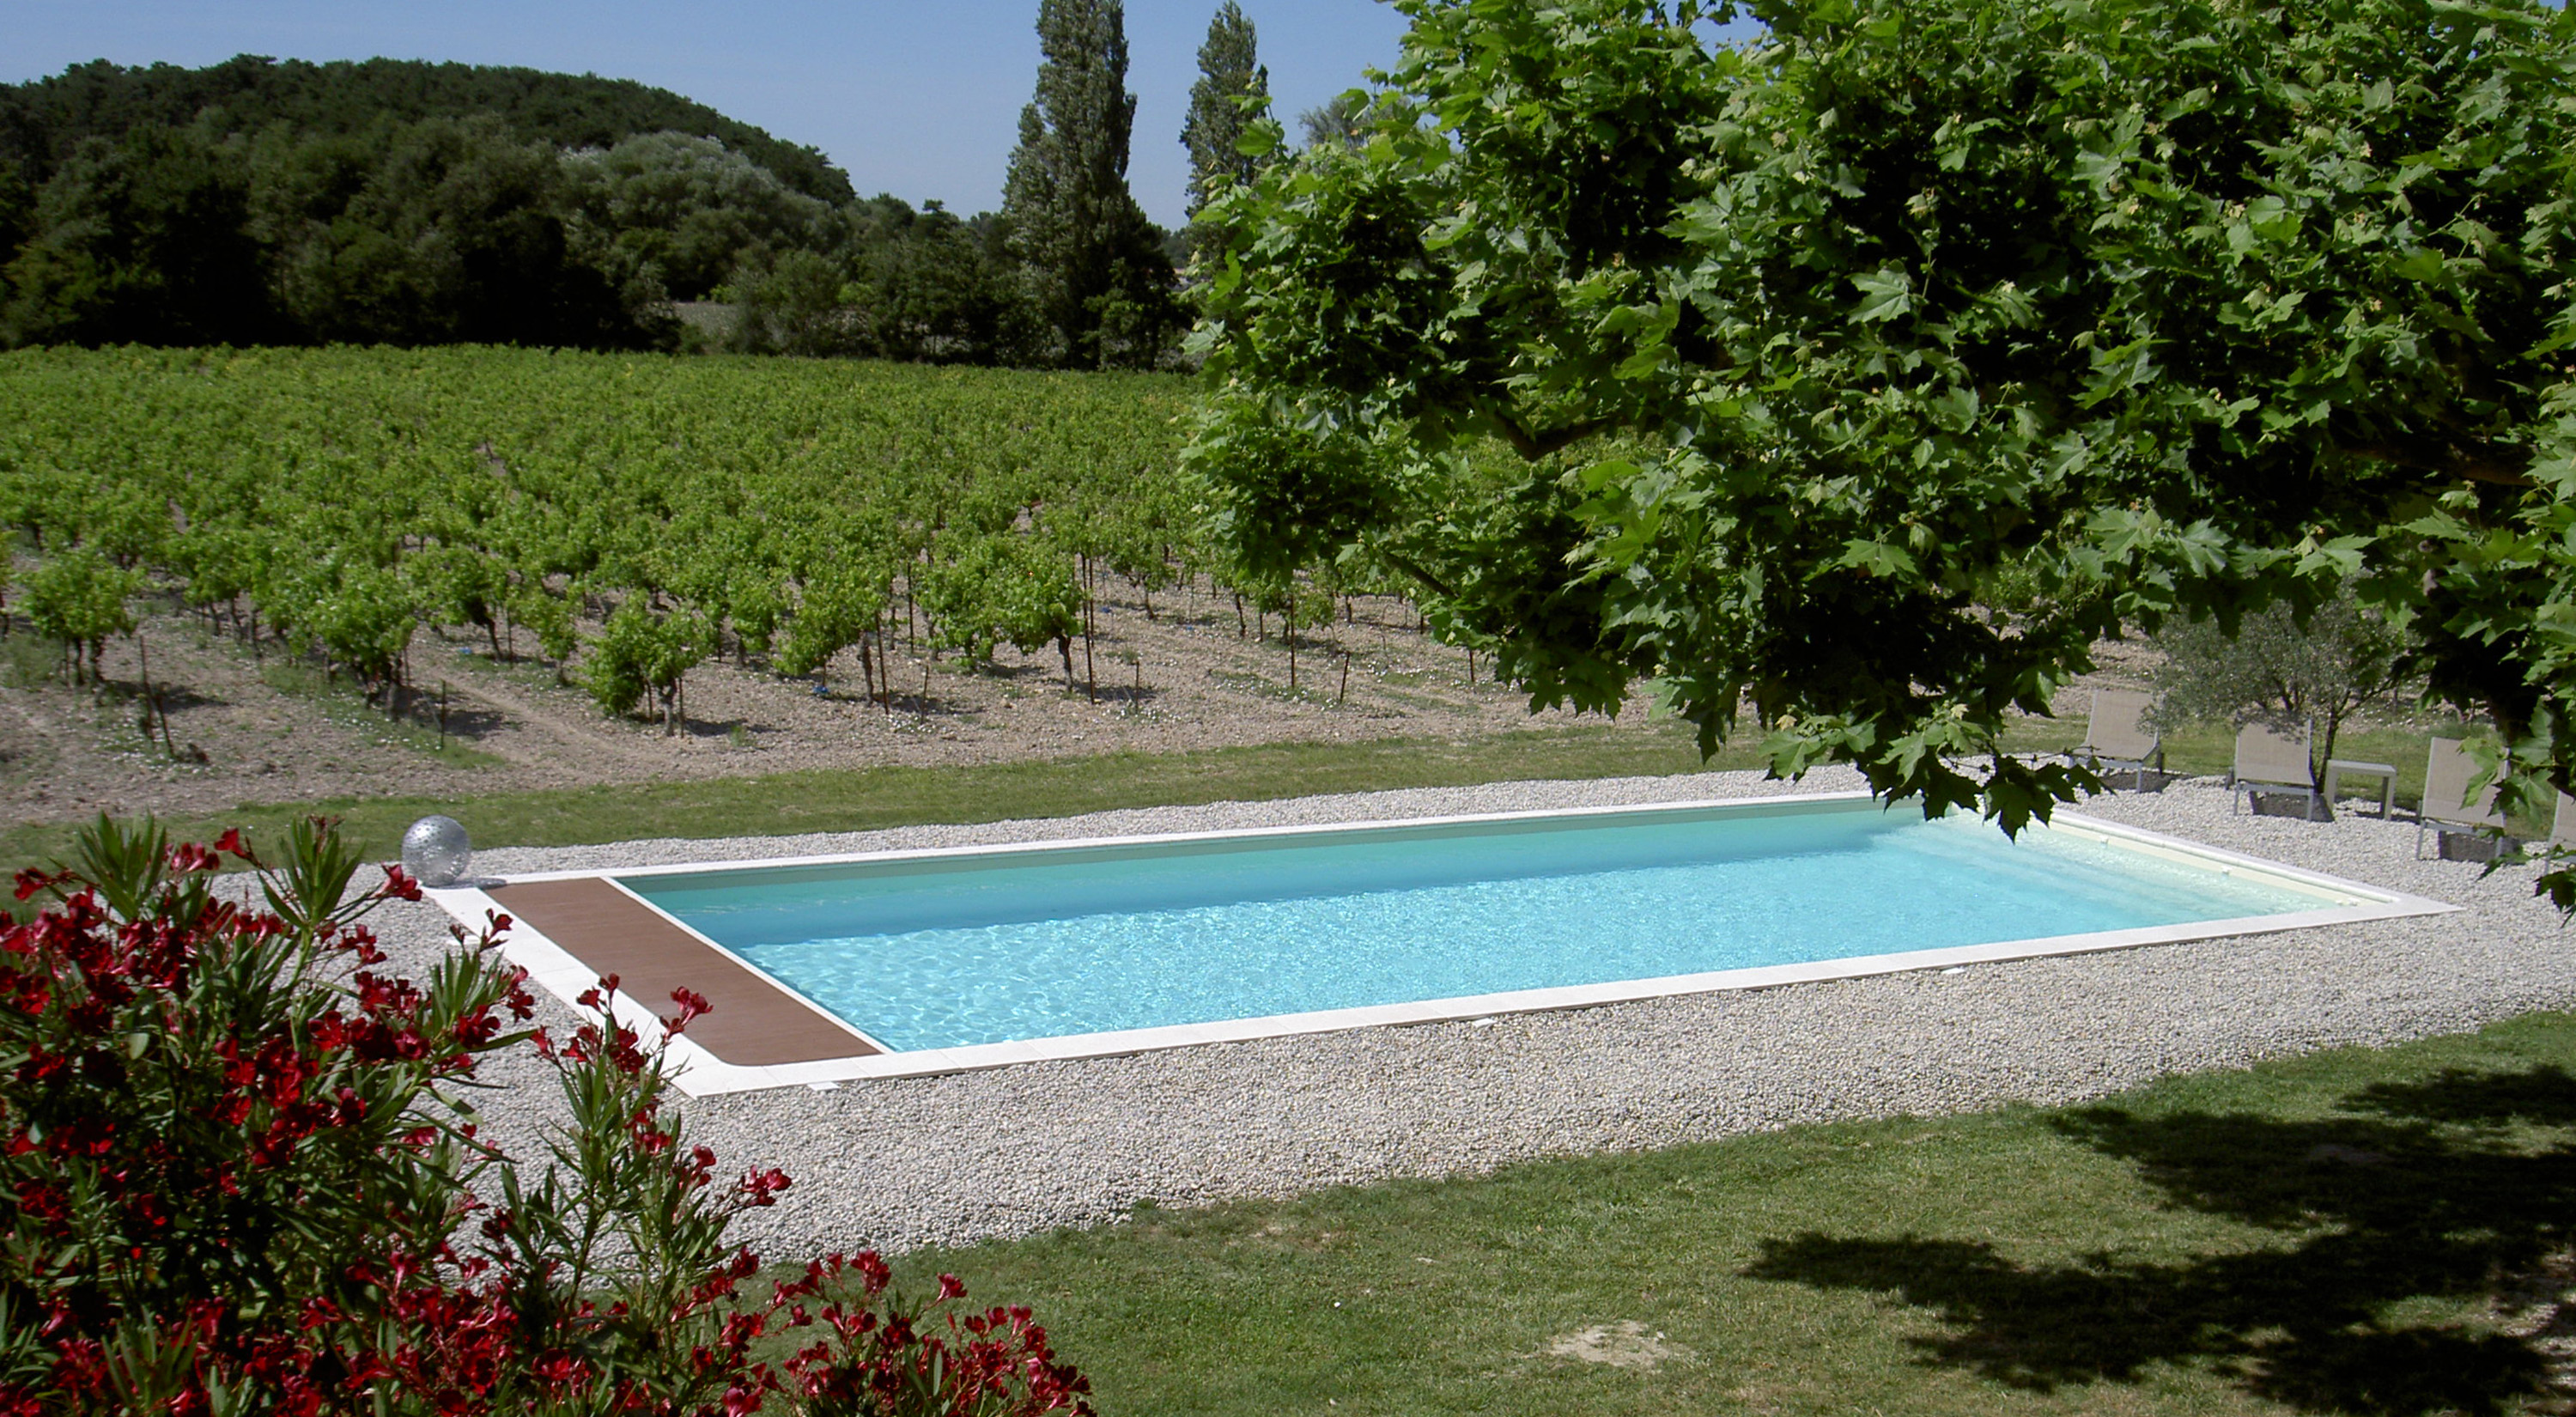 Swimming pool in the middle of the vineyard